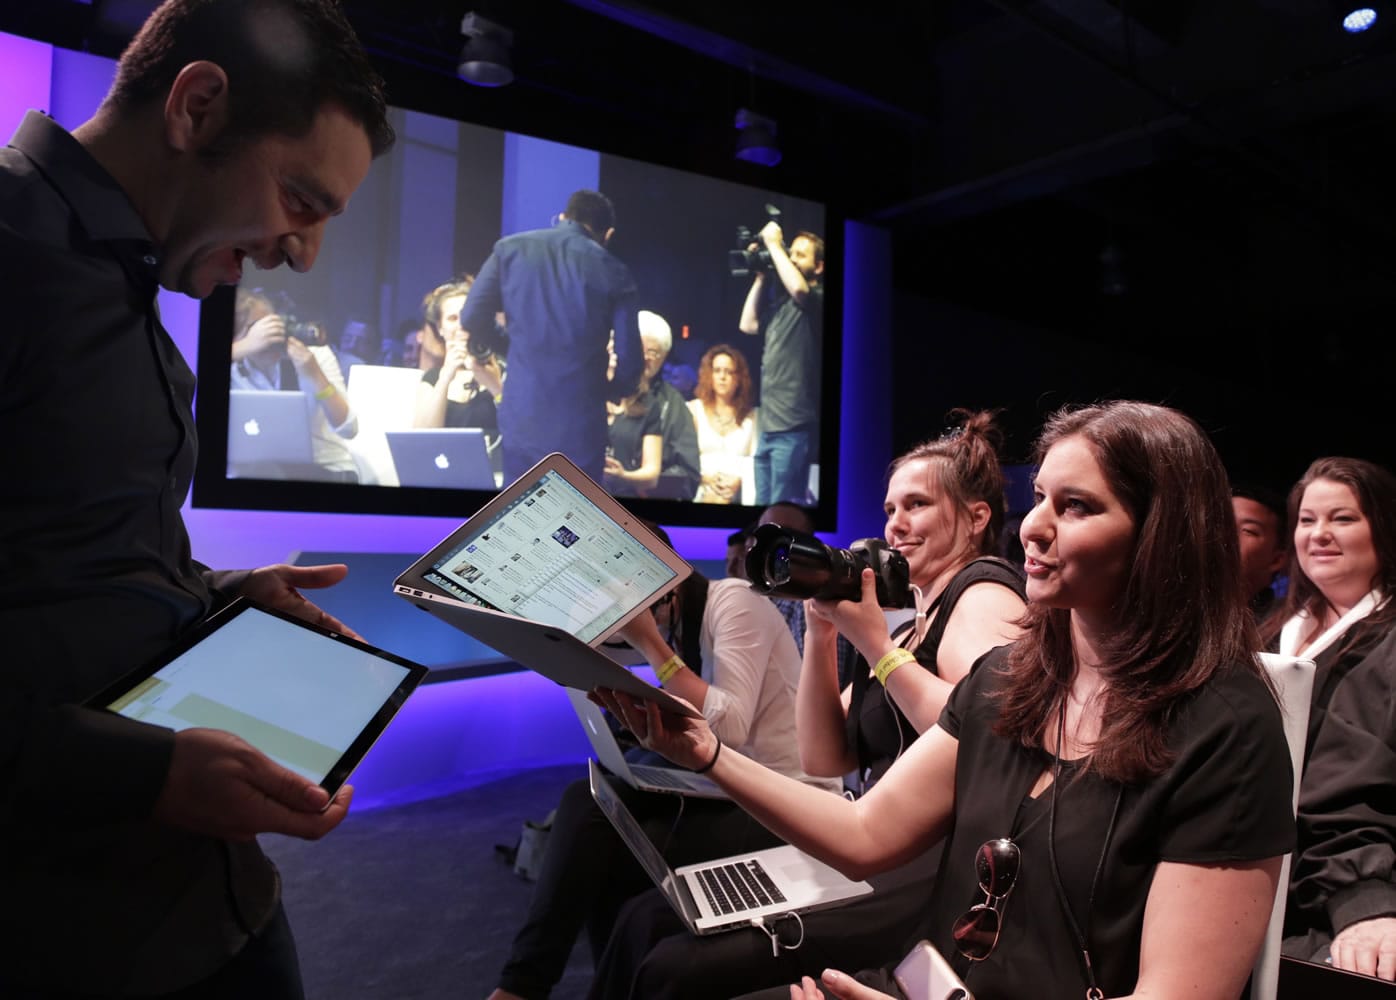 Panos Panay, left, hands a Surface Pro 3 to Joanna Stern, the personal technology columnist for The Wall Street Journal.